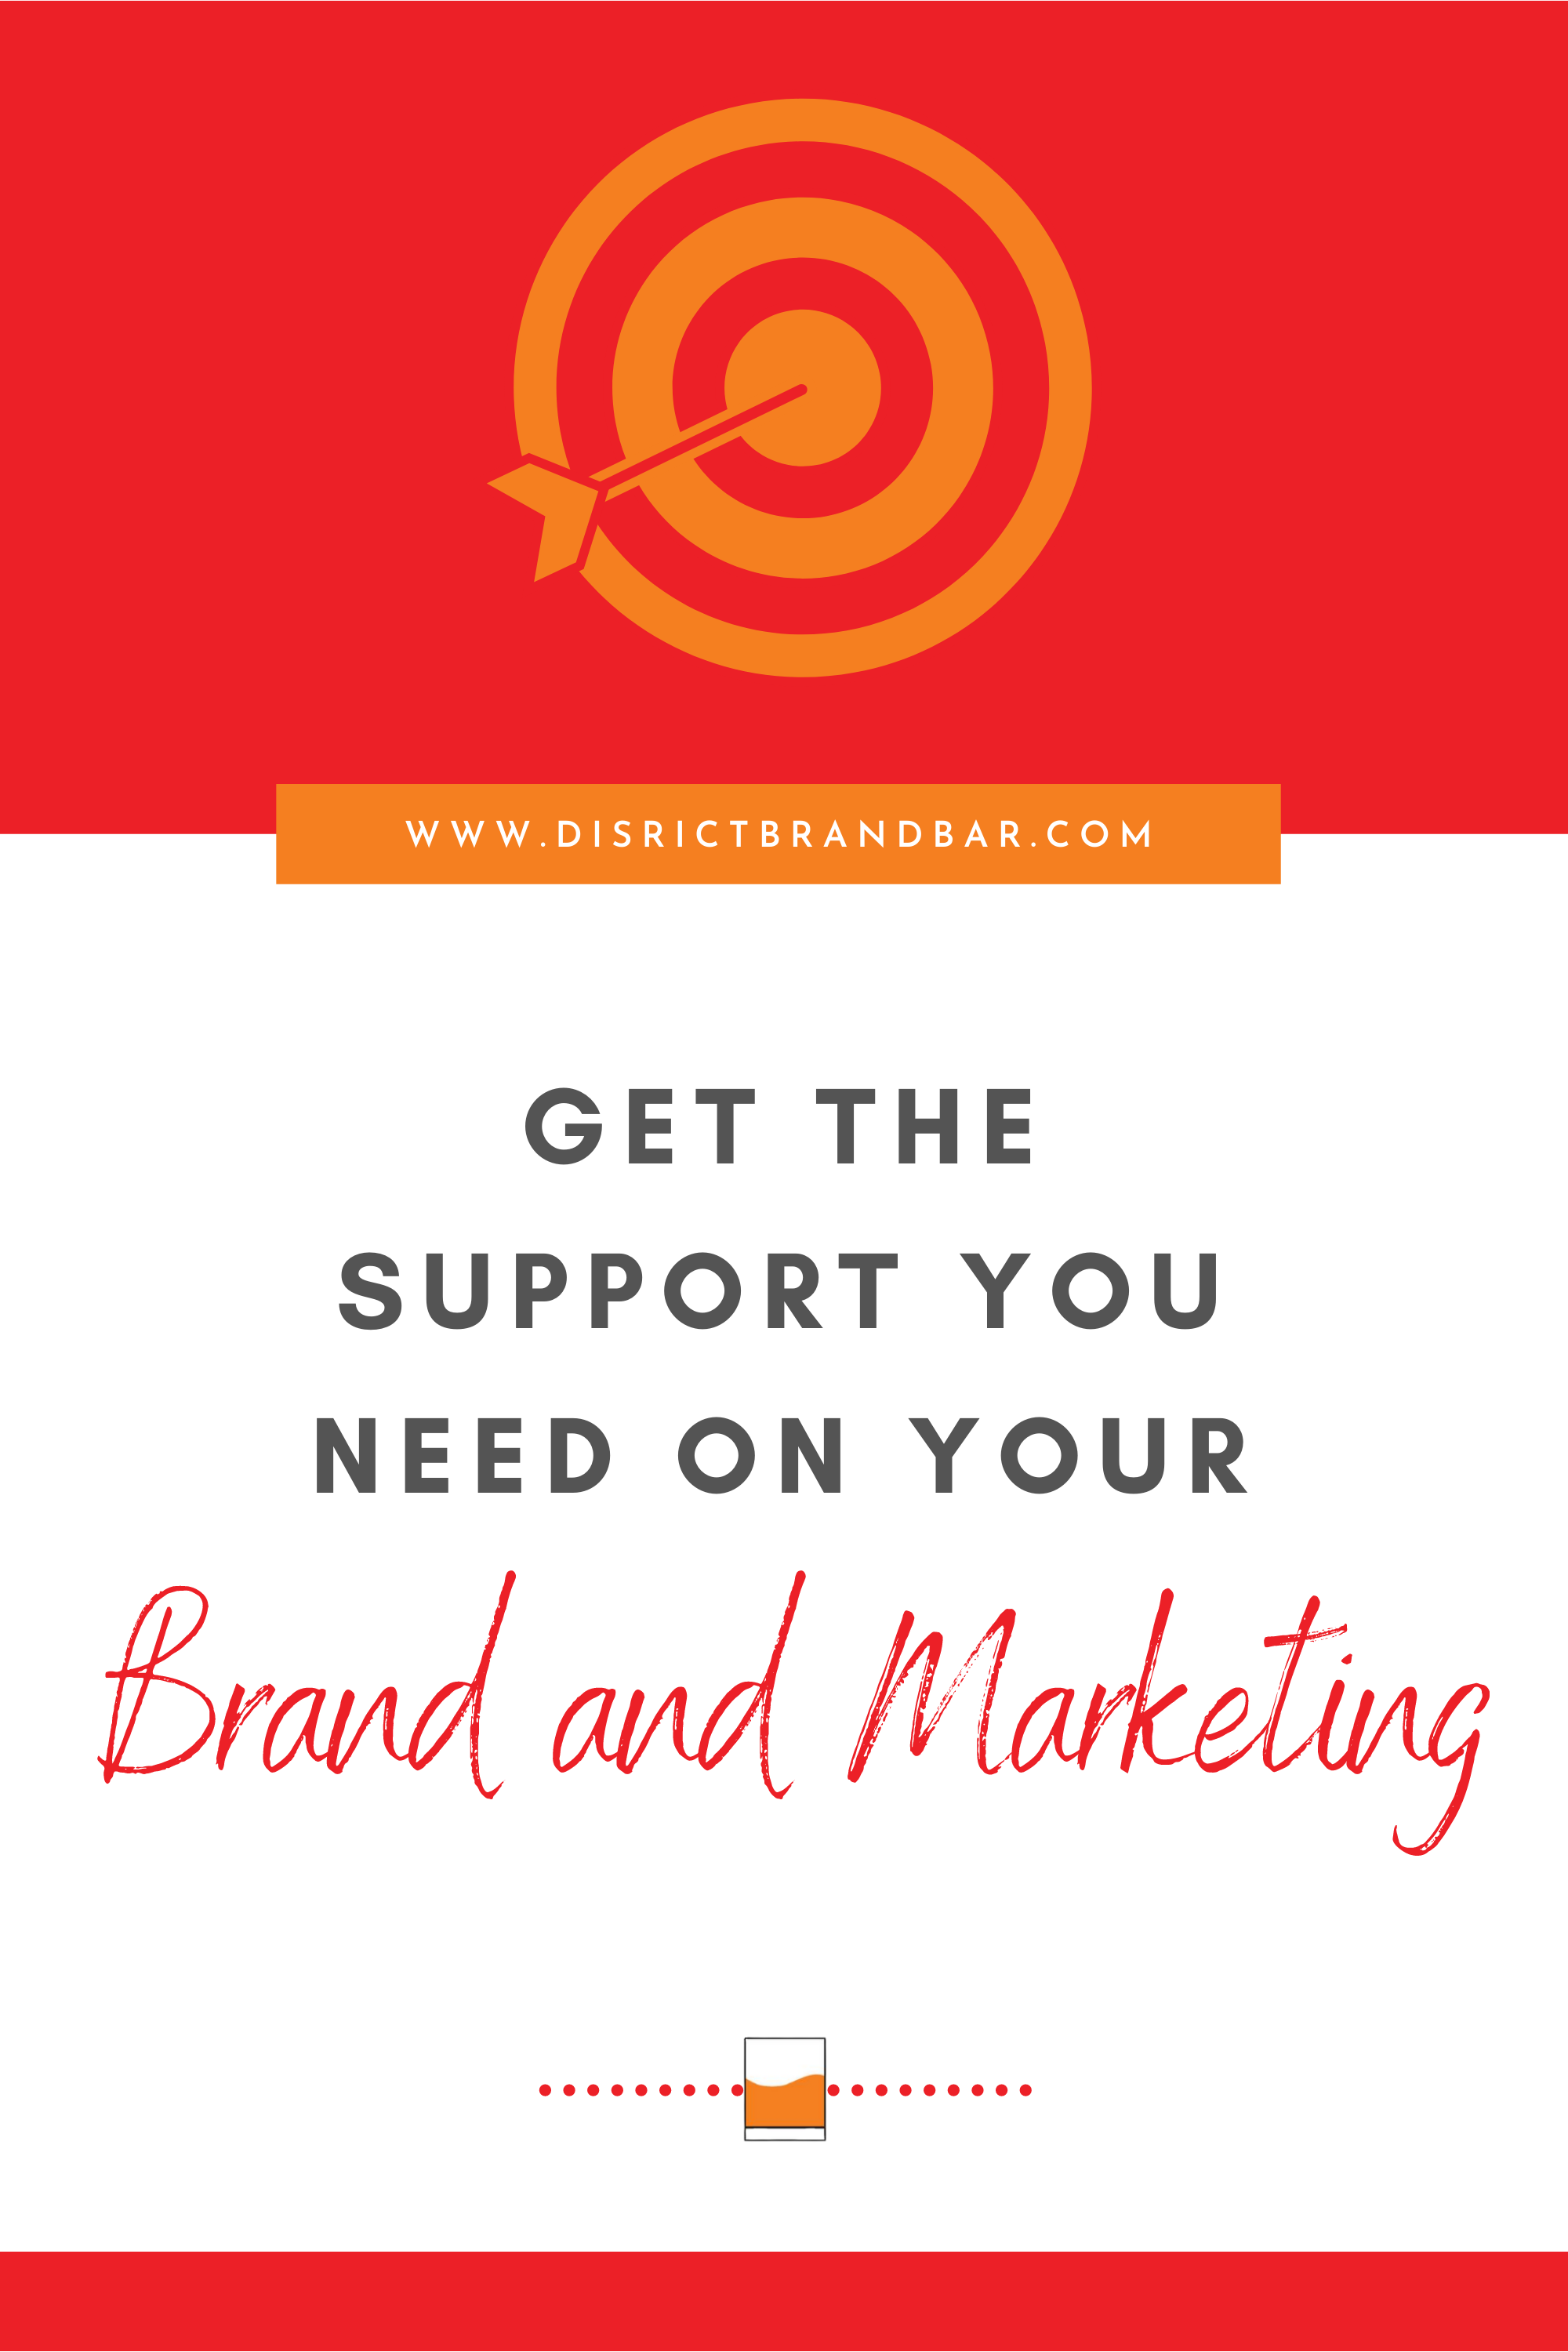 Get the Support You Need on Your Brand and Marketing